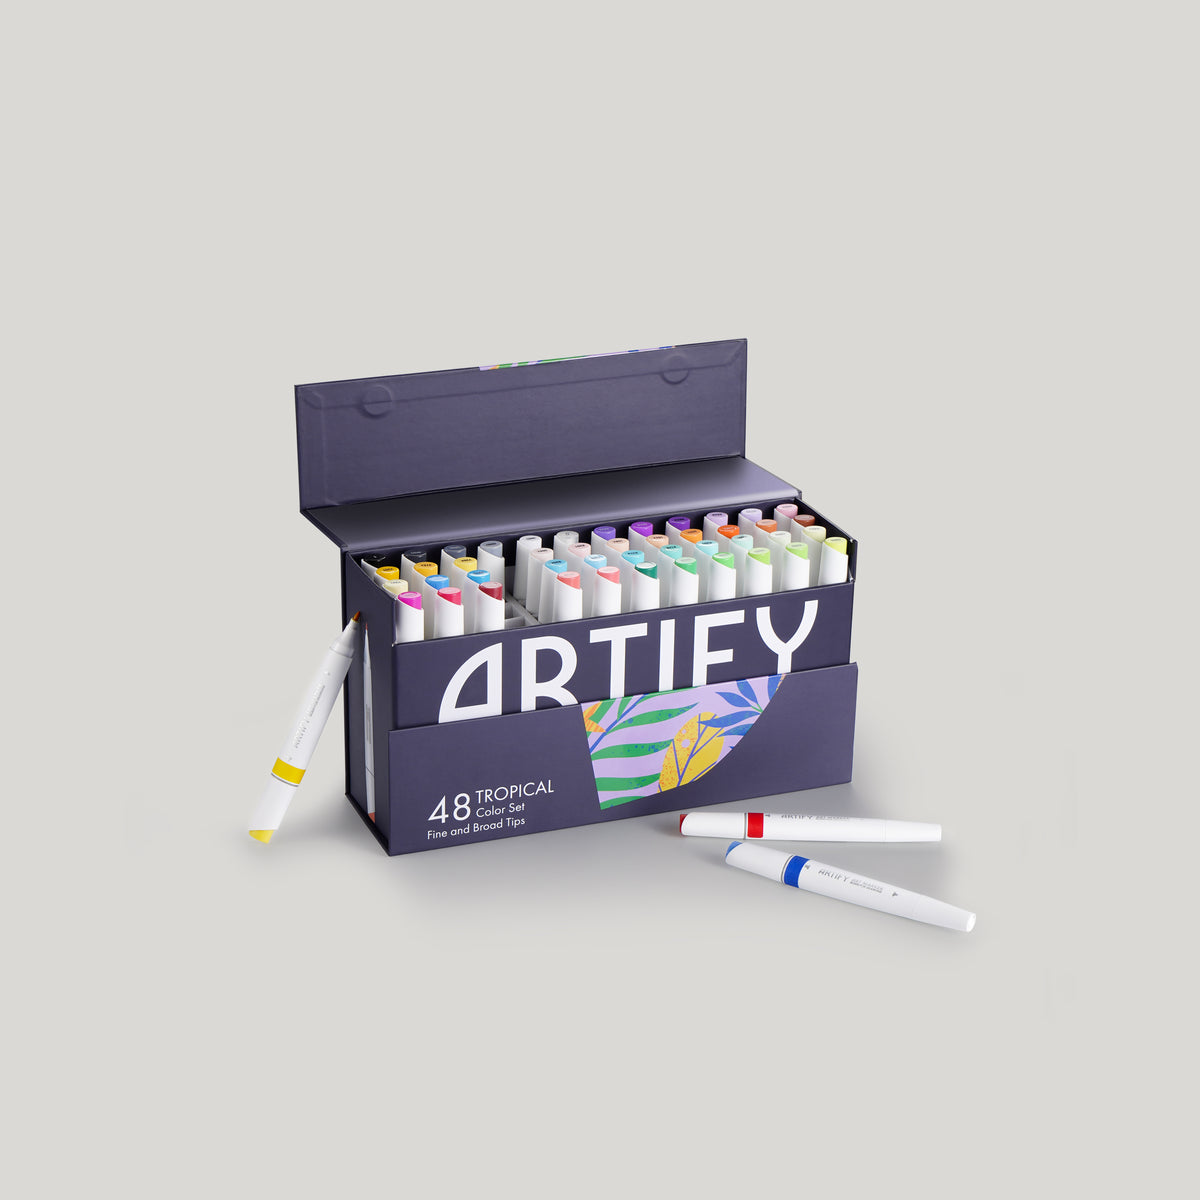 Artify Markers 40 Colors Set - Artist Alcohol Art Dual Tip Markers